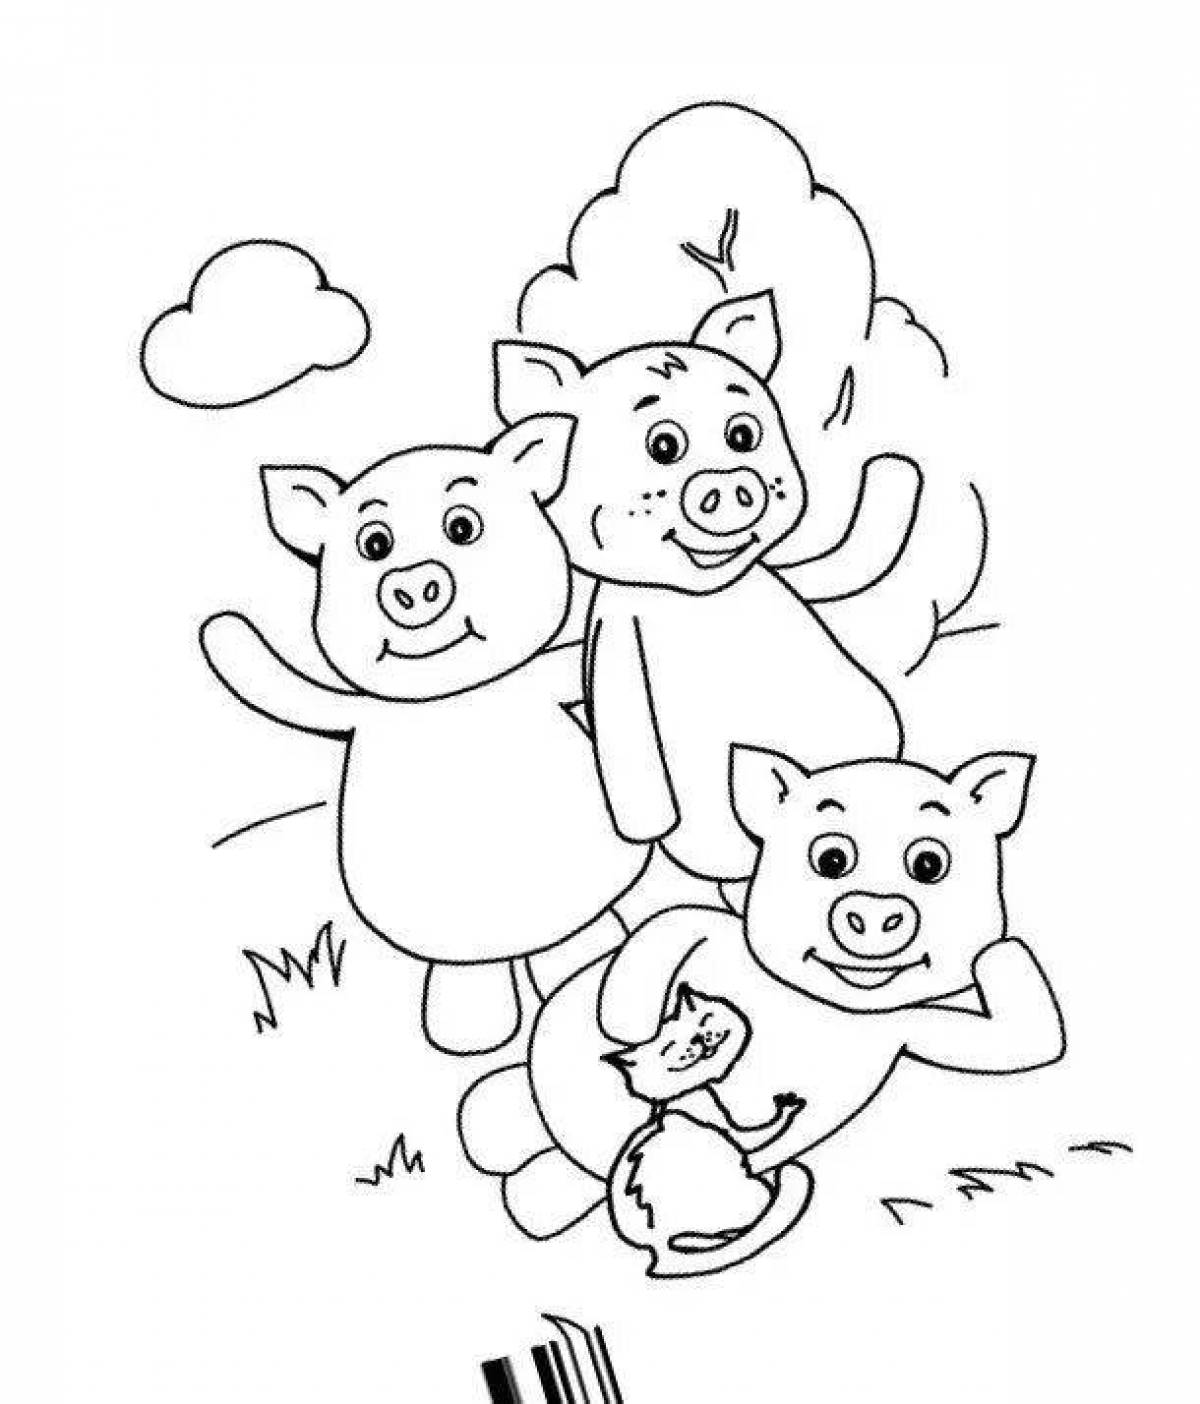 Three little pigs for kids #16